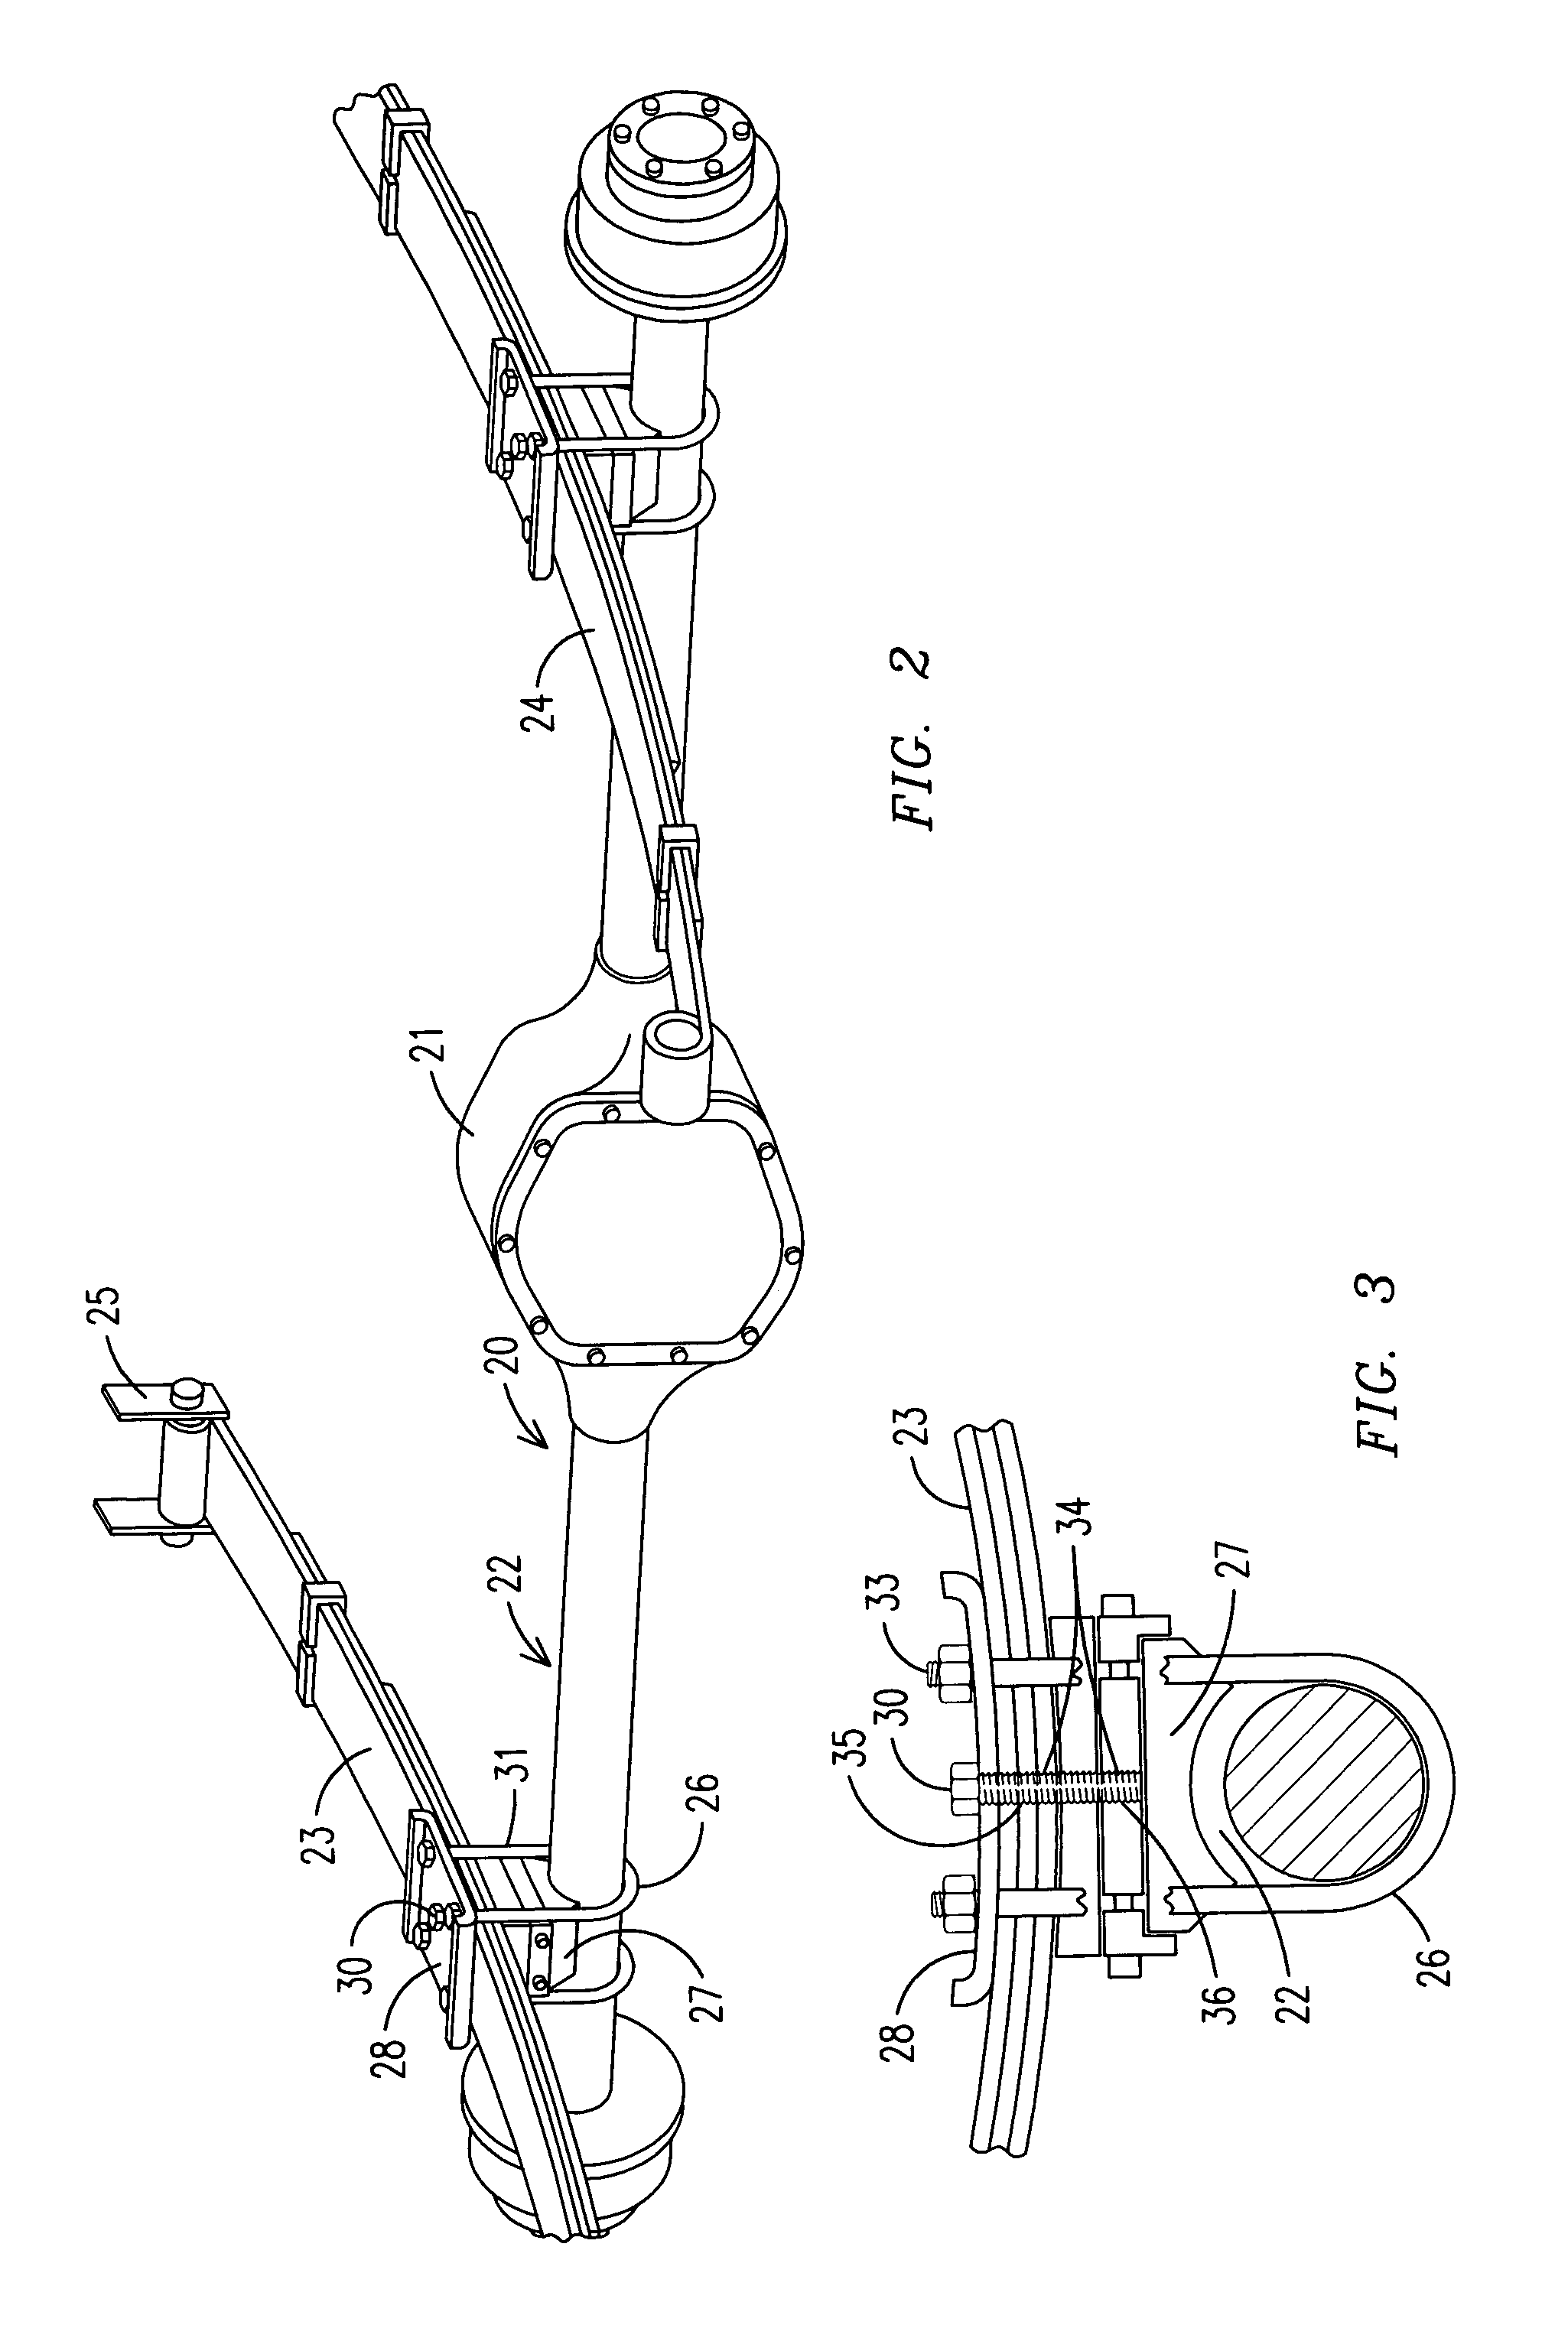 Method and apparatus for aligning the axle of a vehicle